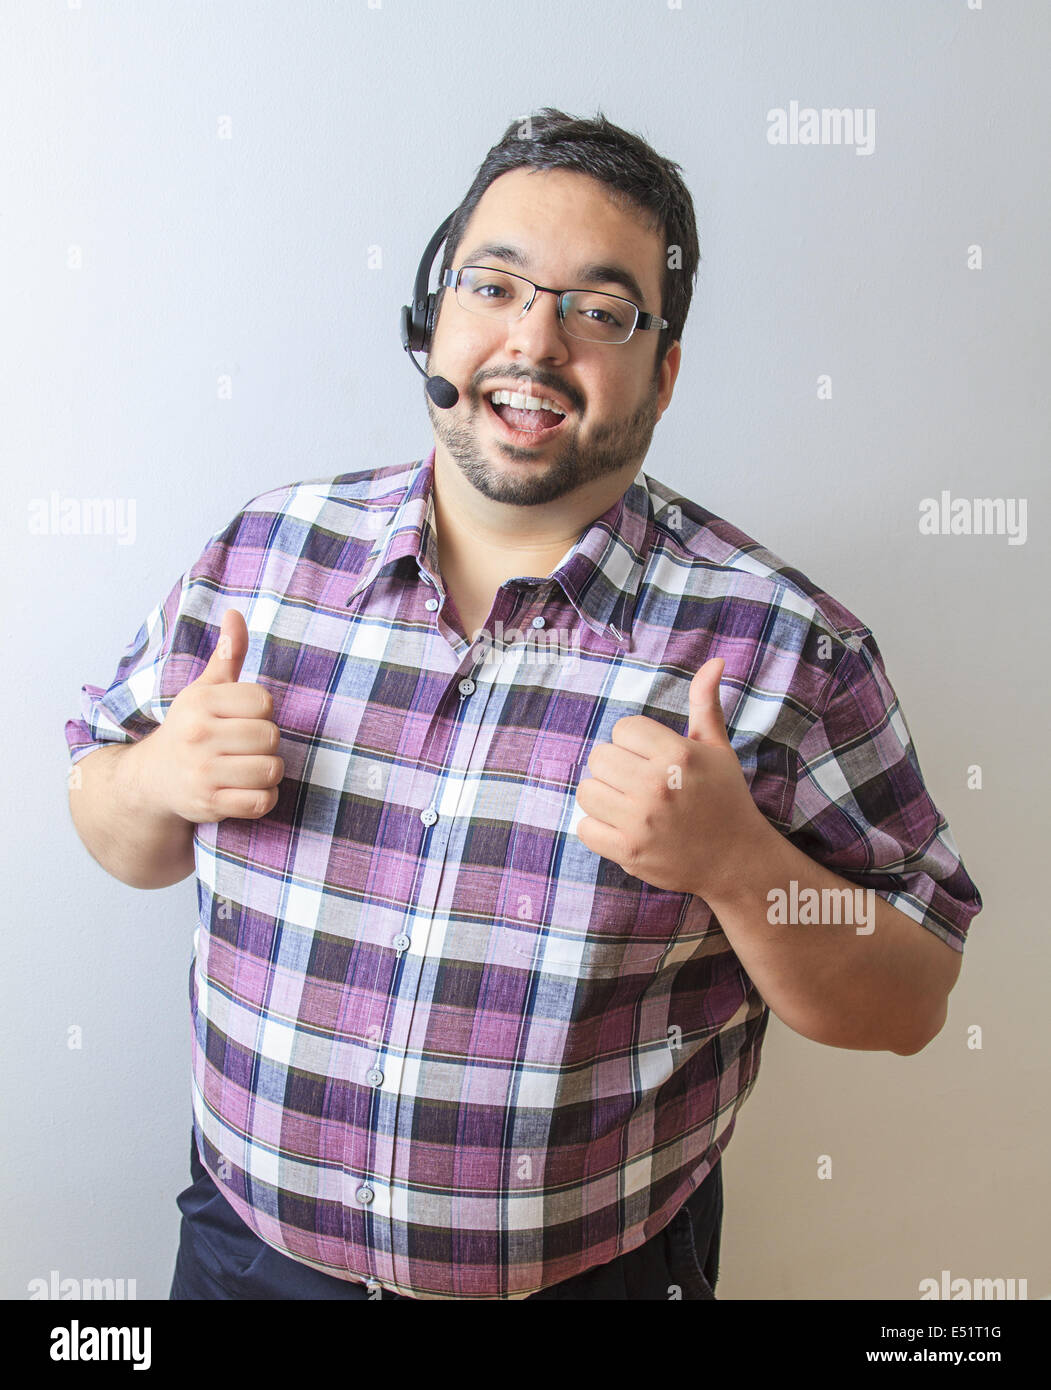 Two thumbs way up Stock Photo